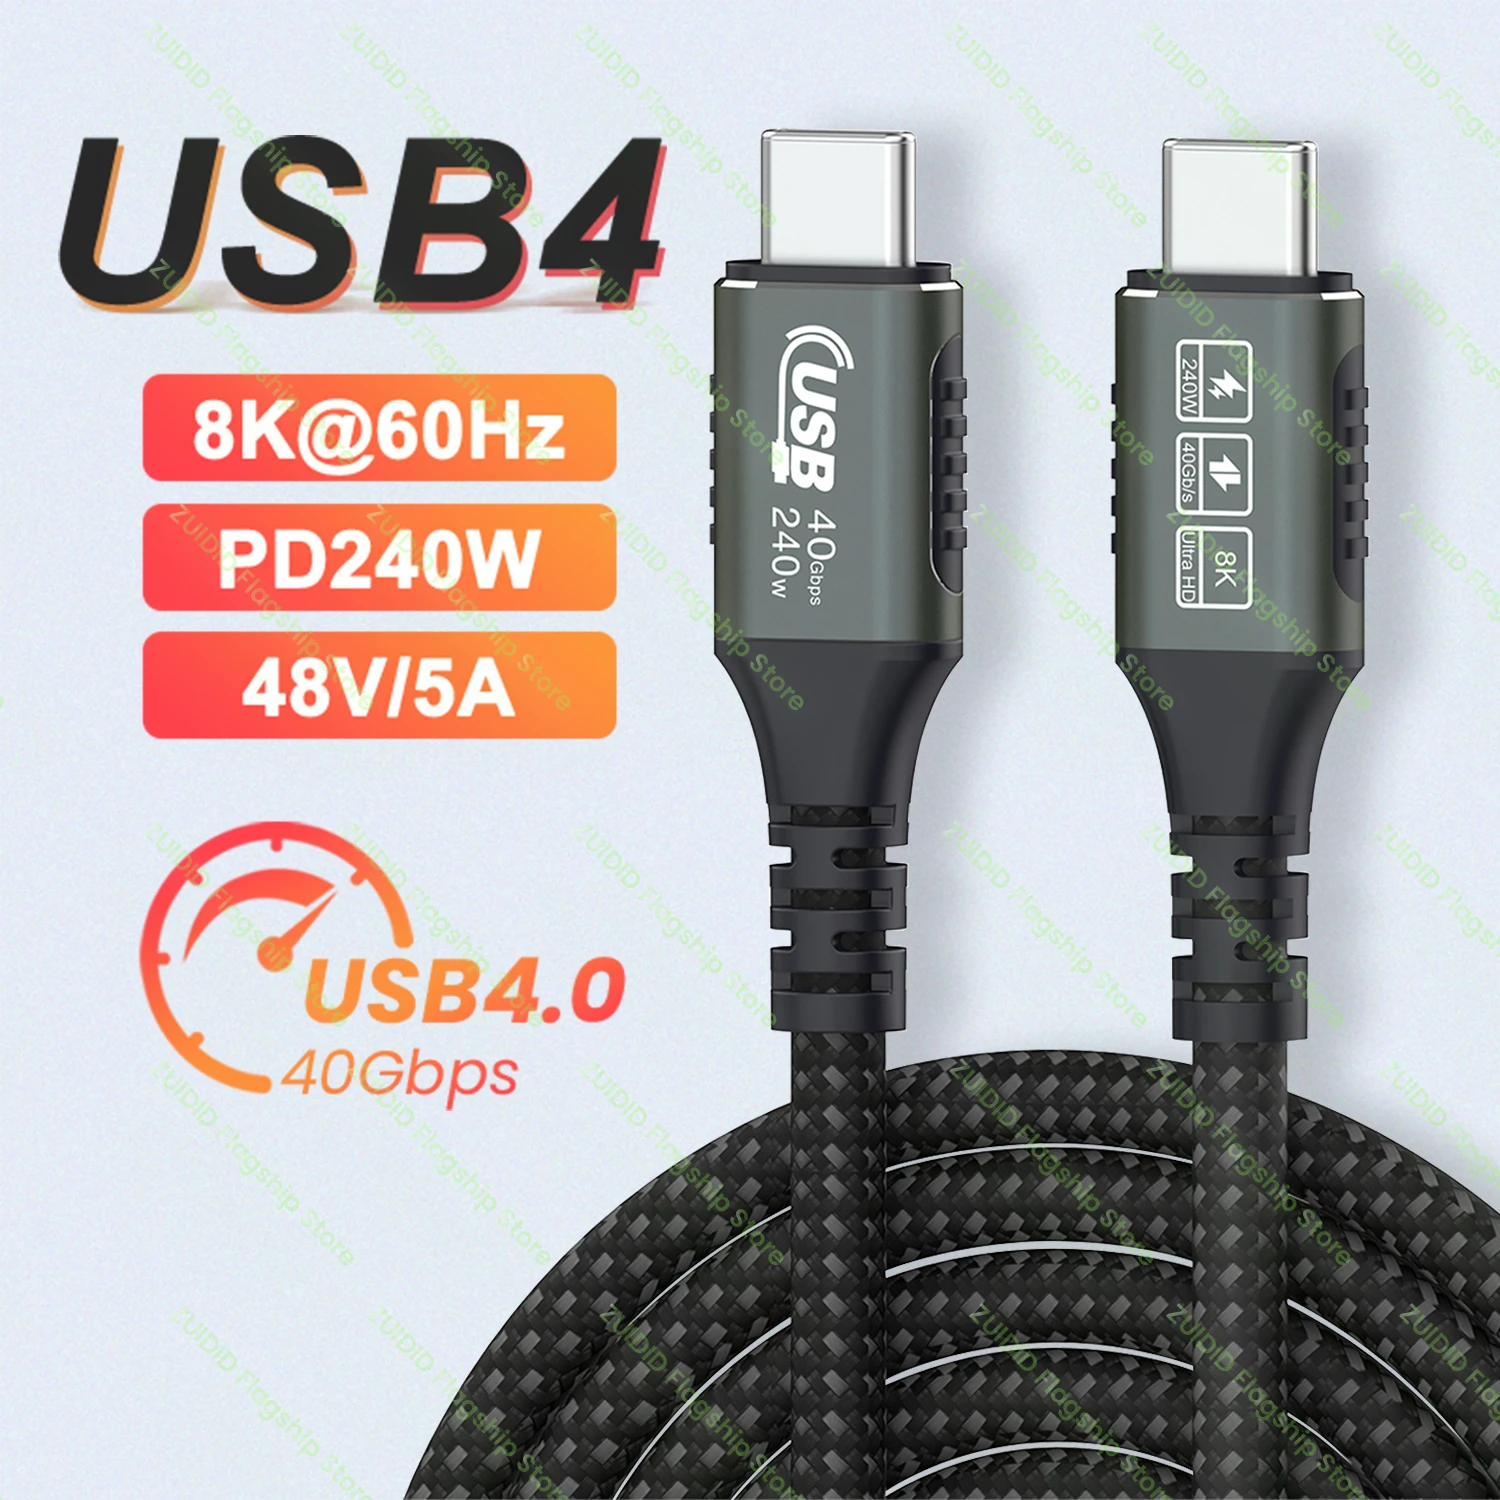 

PD240W USB4.0 40Gbps Type C to C Data Cable 5A Fast Charging 8K@60Hz Cable for MacBook Pro Nintendo Switch Steam Deck Samsung